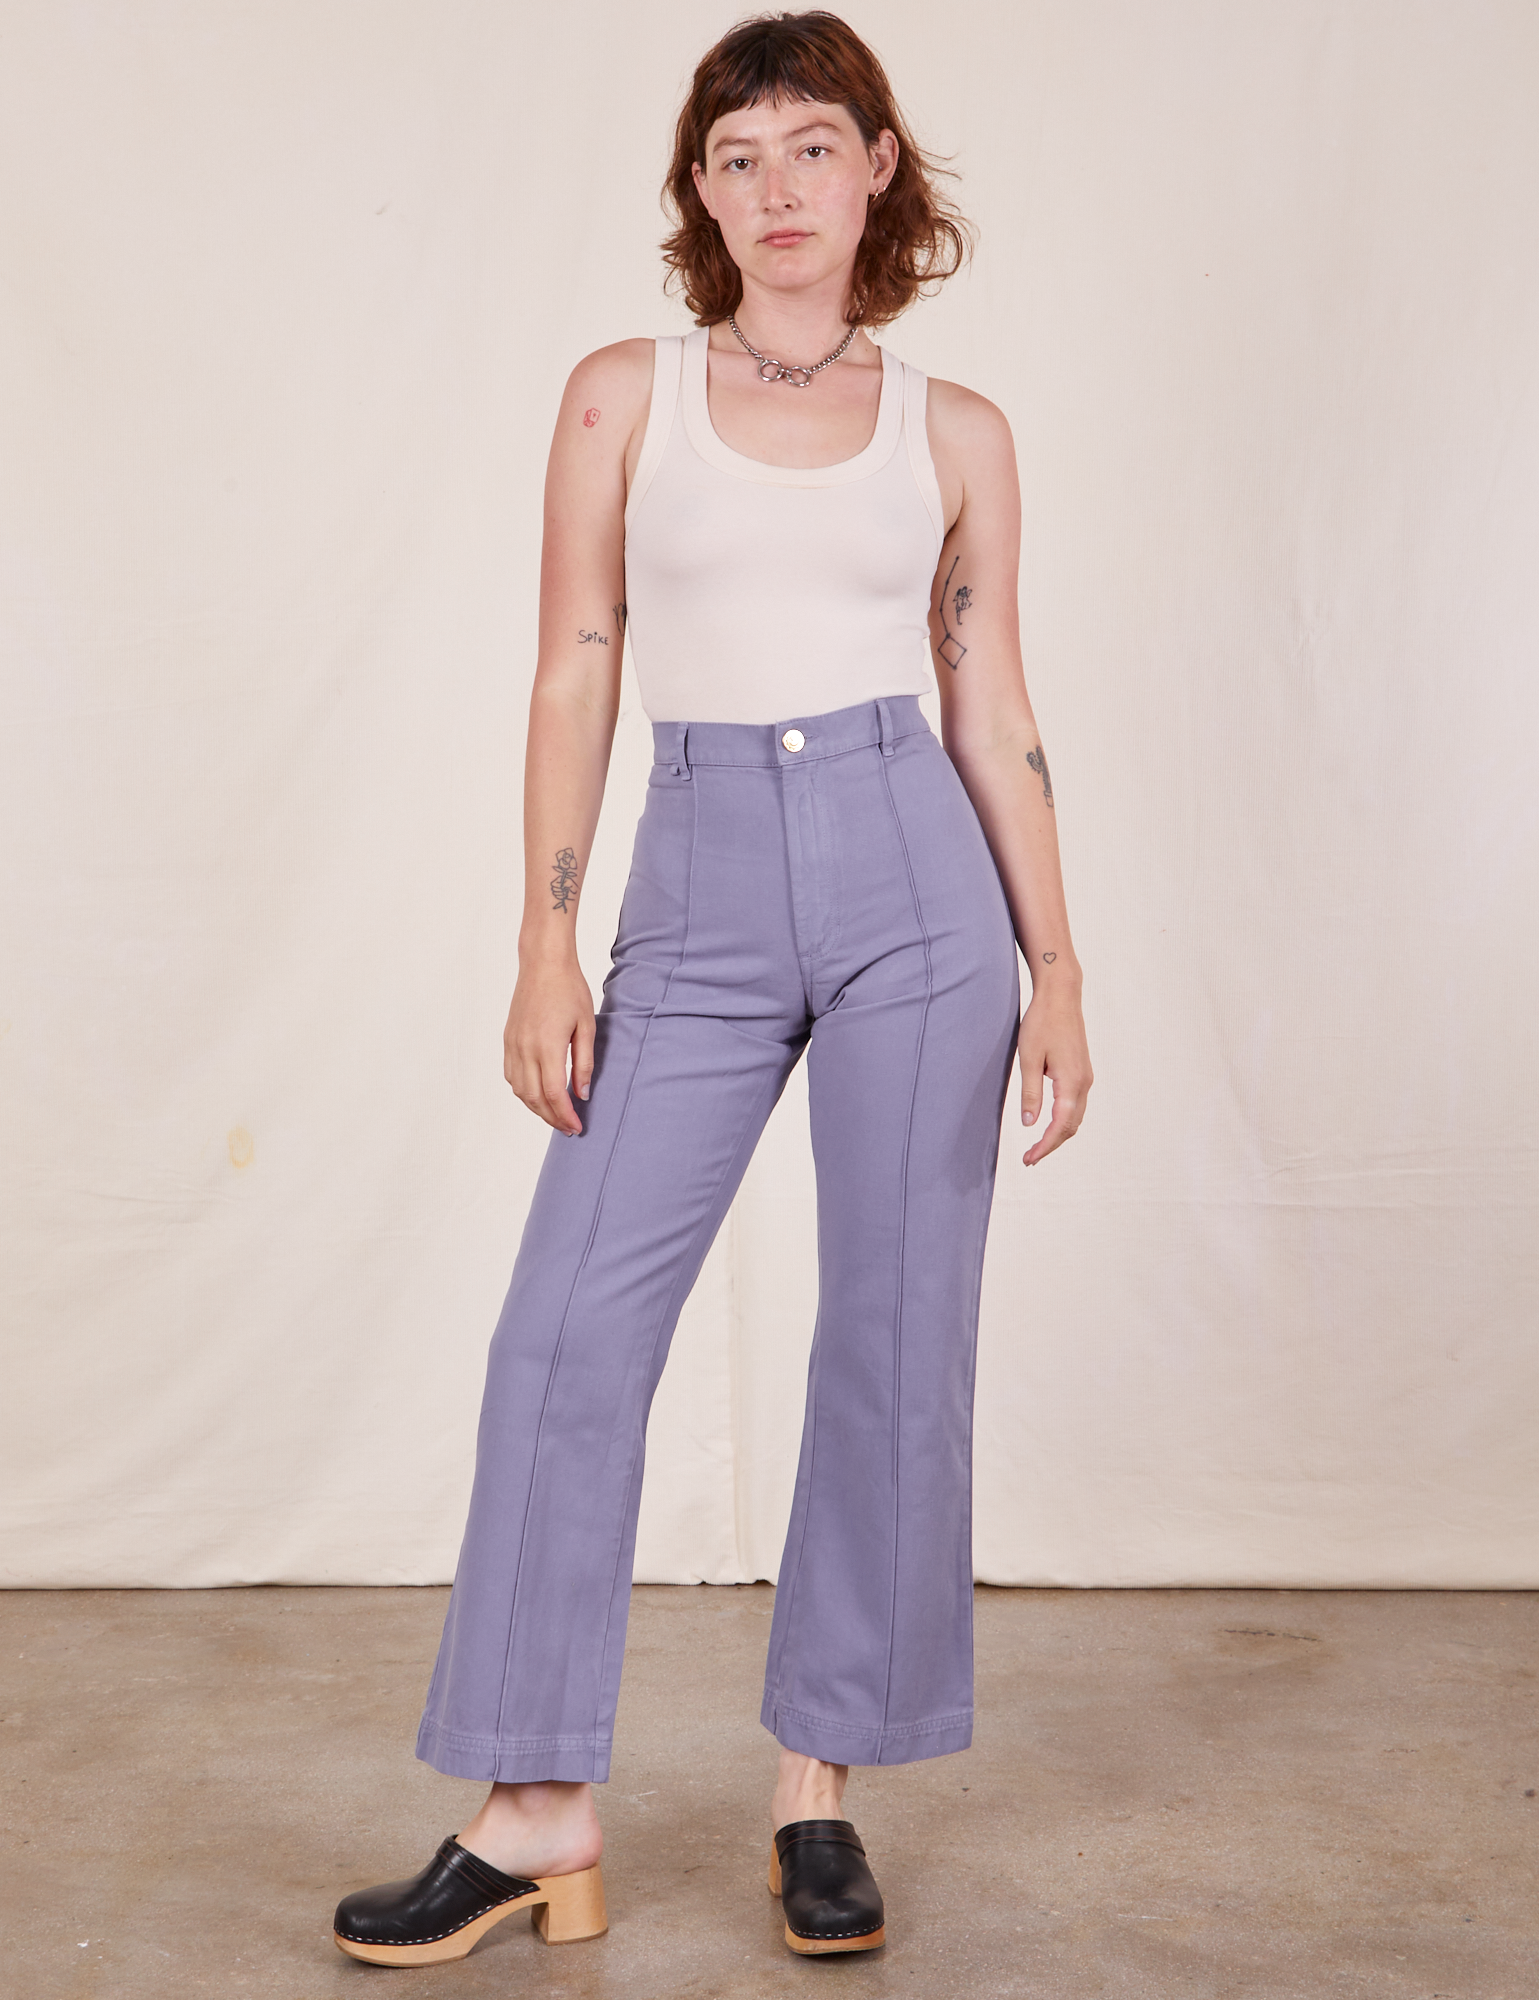 Alex is 5'8" and wearing XS Western Pants in Faded Grape paired with vTank Top in intage tee off-white